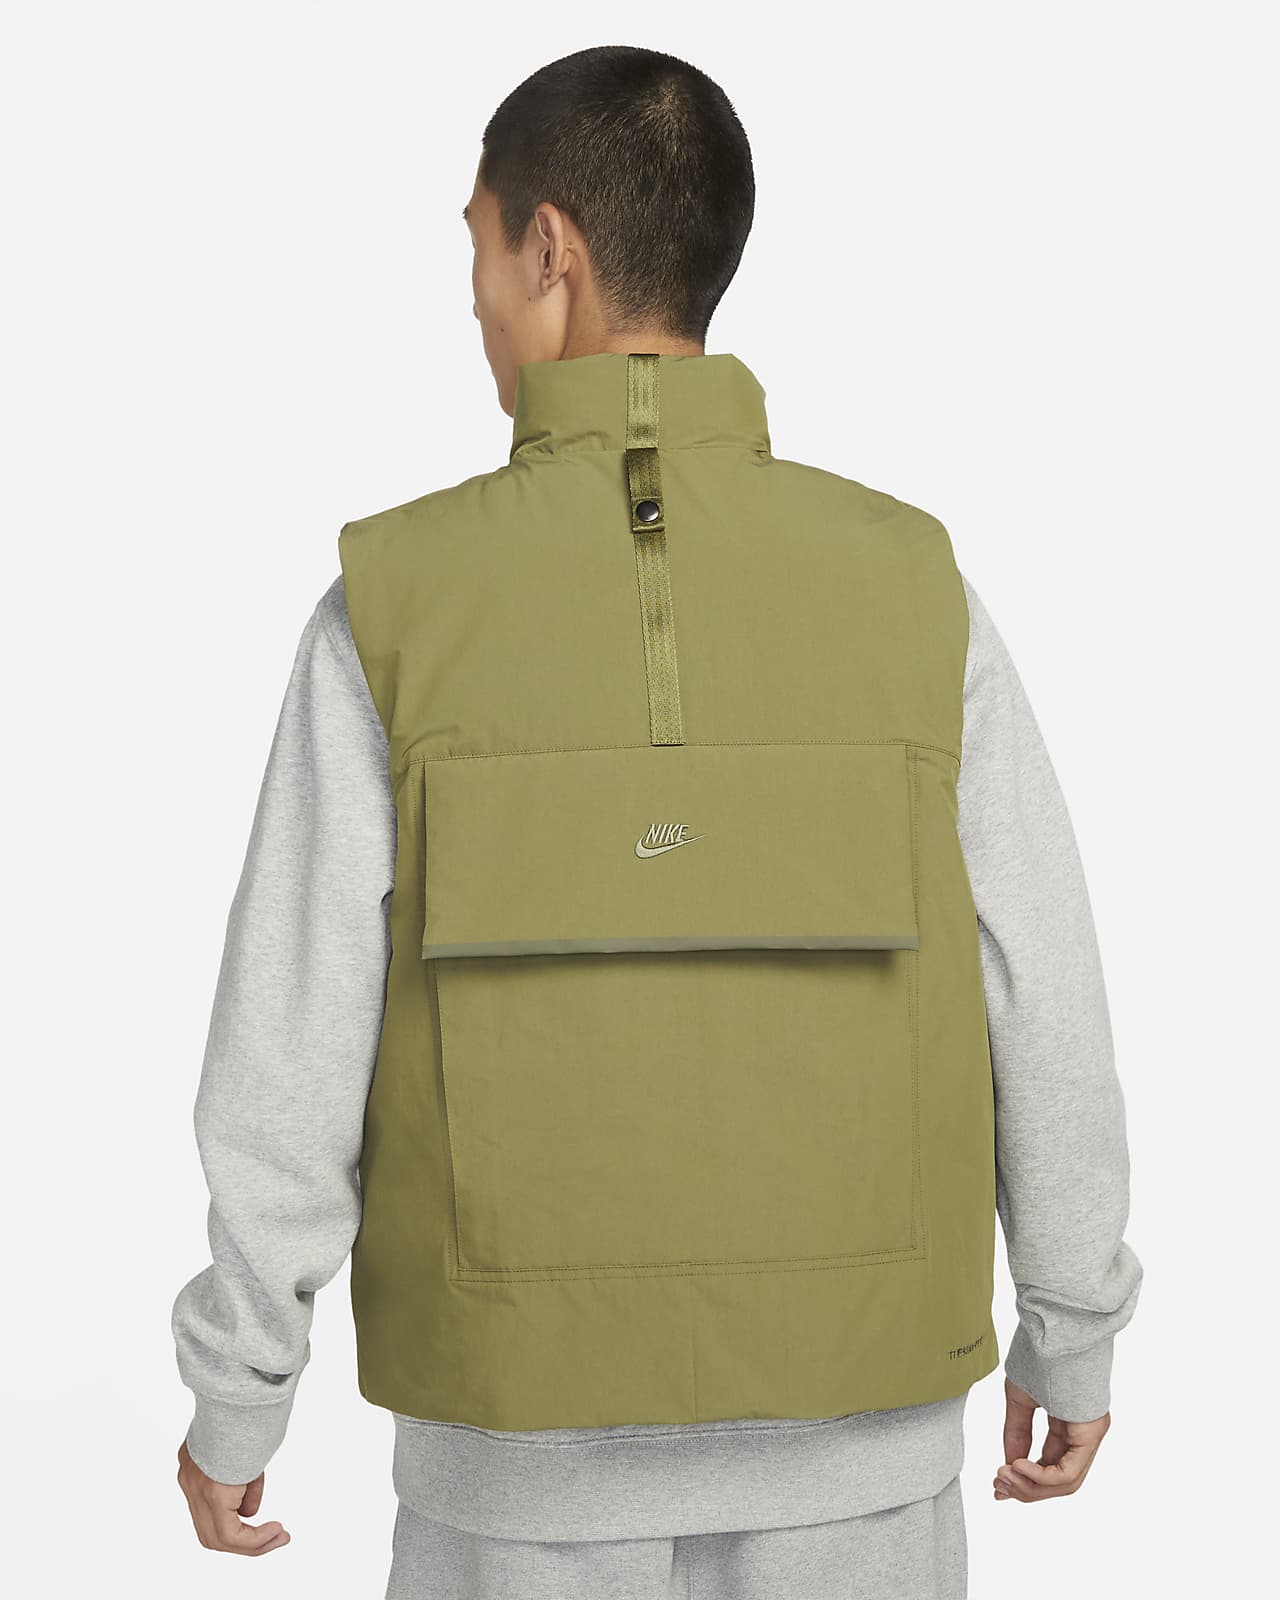 NIKE THERMA FIT TECH PACK INSULATED VEST